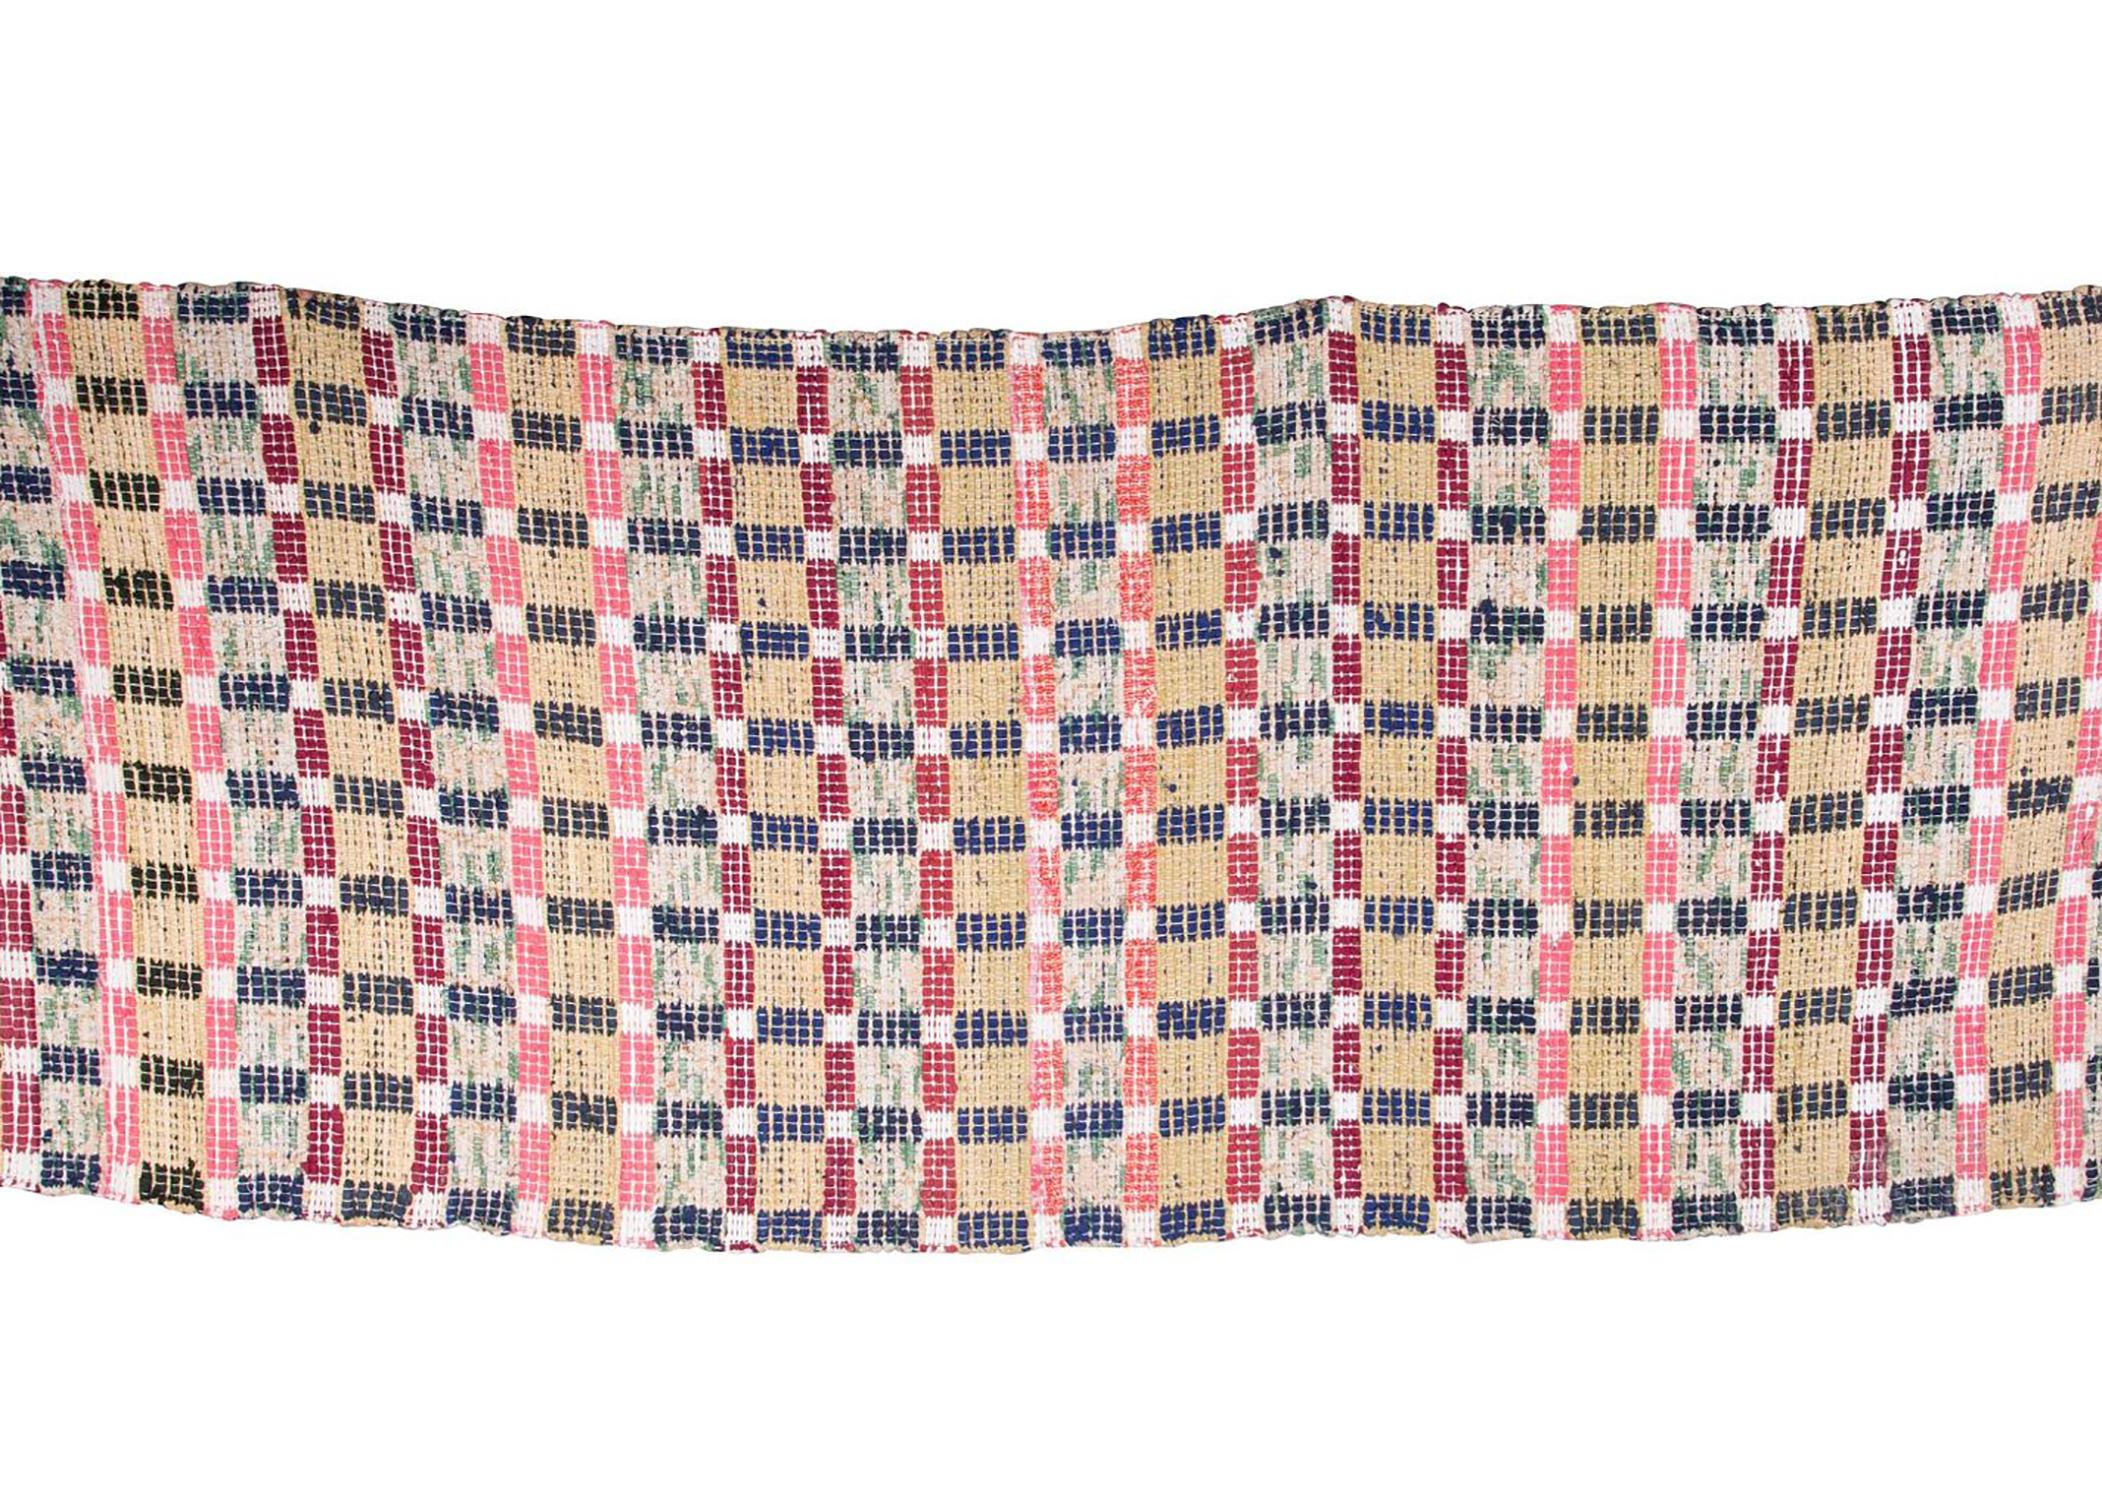 A decorative handmade Swedish rug in a blocked square design, with accents of raspberry, cream and black.